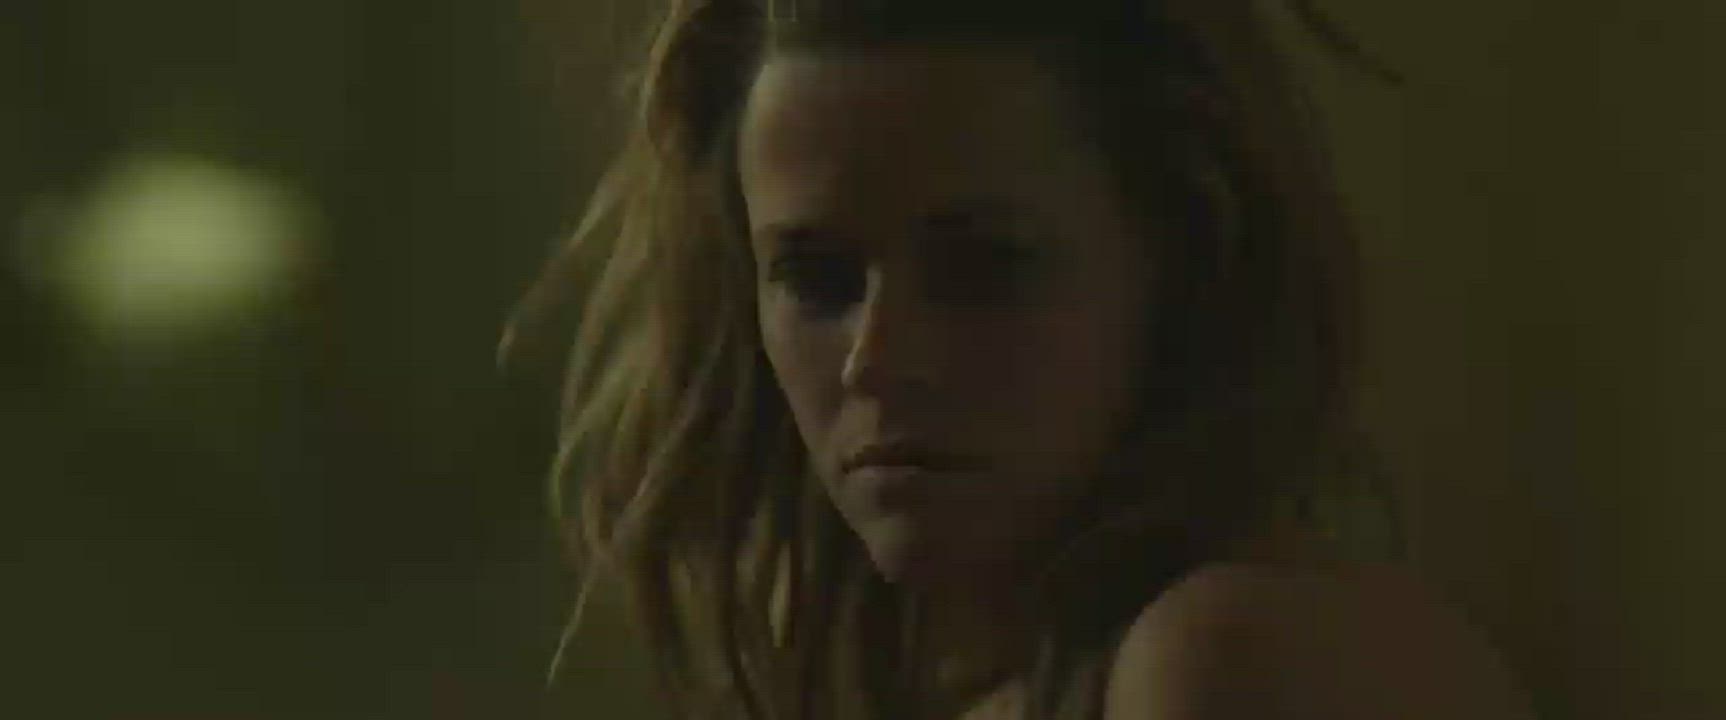 Reese Witherspoon Getting Fucked Hard. : video clip